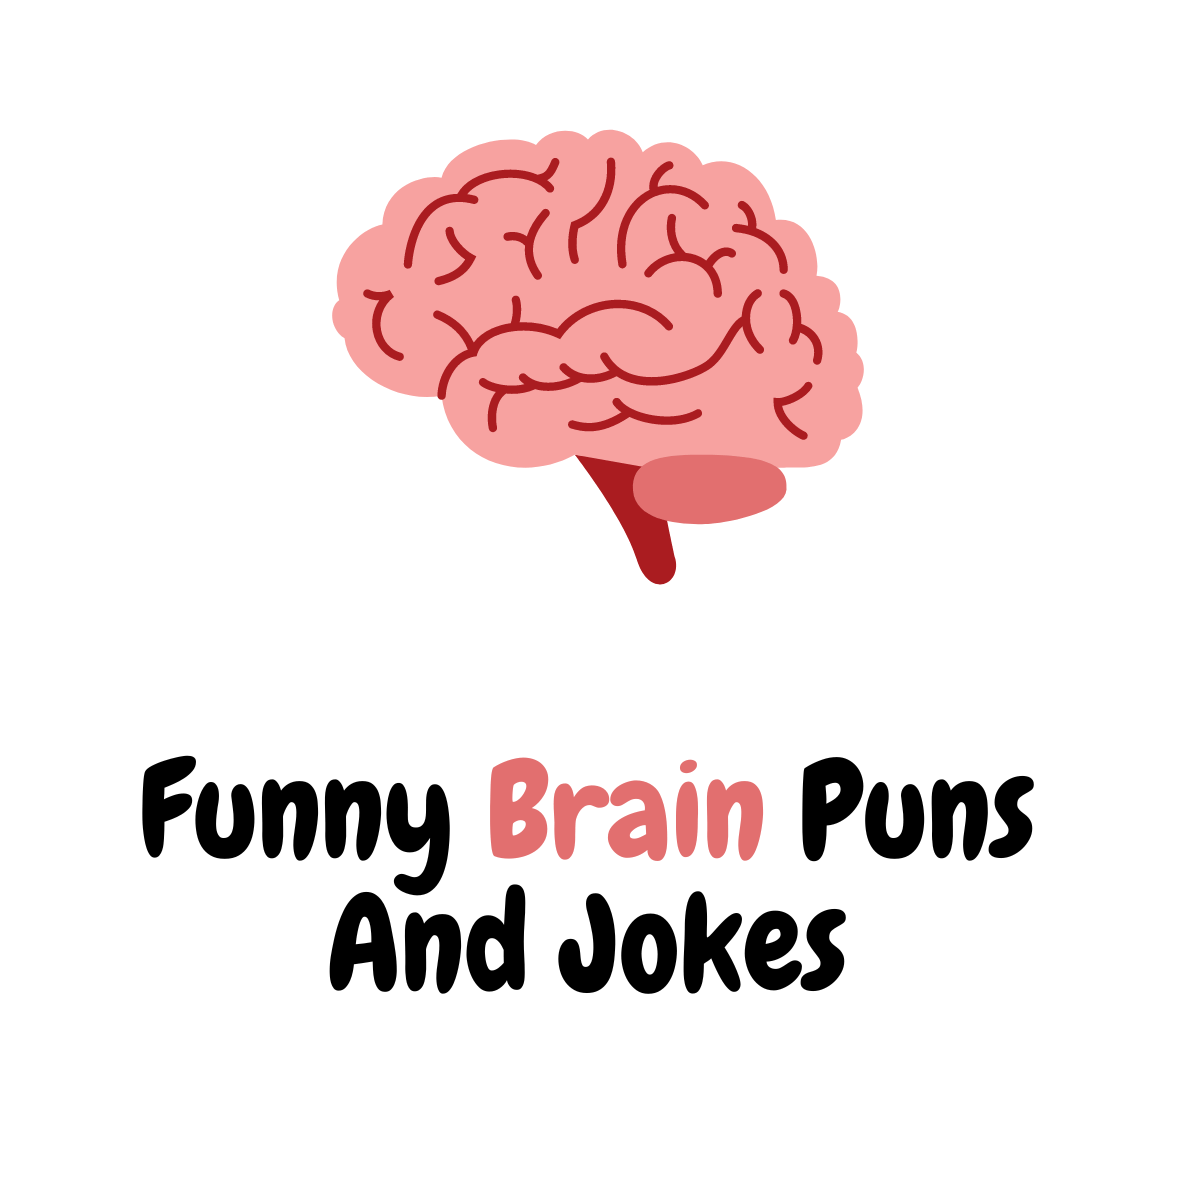 130+ Funny Brain Puns And Jokes: Mind-Bending Humor - Funniest Puns